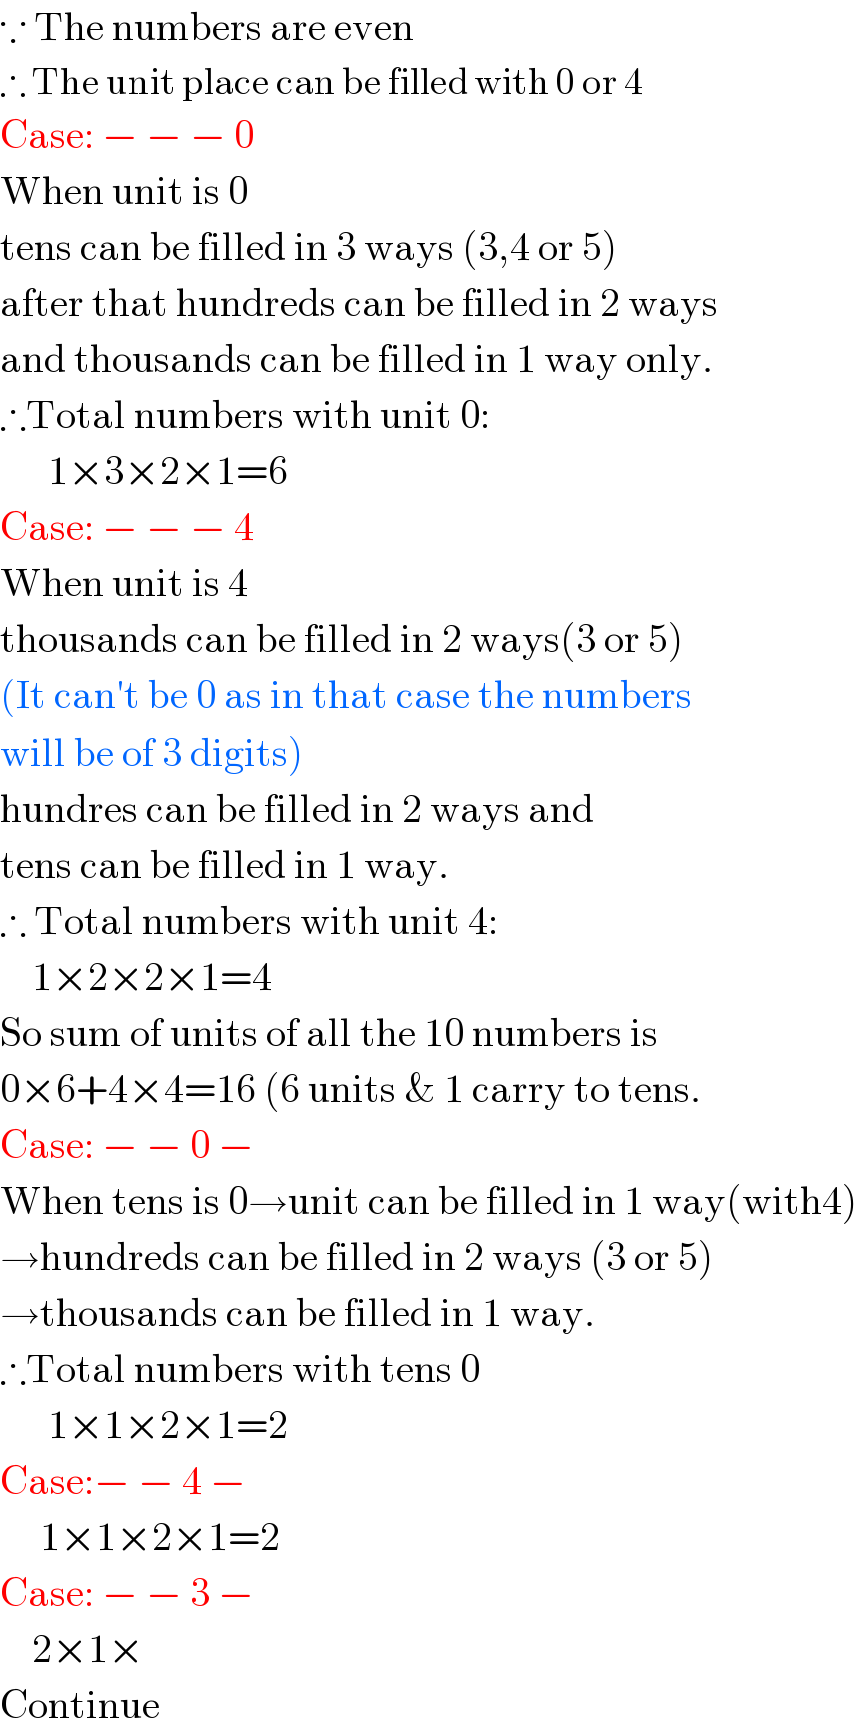 ∵ The numbers are even  ∴ The unit place can be filled with 0 or 4  Case: − − − 0  When unit is 0  tens can be filled in 3 ways (3,4 or 5)  after that hundreds can be filled in 2 ways  and thousands can be filled in 1 way only.  ∴Total numbers with unit 0:        1×3×2×1=6  Case: − − − 4  When unit is 4  thousands can be filled in 2 ways(3 or 5)  (It can′t be 0 as in that case the numbers  will be of 3 digits)  hundres can be filled in 2 ways and   tens can be filled in 1 way.  ∴ Total numbers with unit 4:      1×2×2×1=4  So sum of units of all the 10 numbers is  0×6+4×4=16 (6 units & 1 carry to tens.  Case: − − 0 −  When tens is 0→unit can be filled in 1 way(with4)  →hundreds can be filled in 2 ways (3 or 5)  →thousands can be filled in 1 way.  ∴Total numbers with tens 0        1×1×2×1=2  Case:− − 4 −       1×1×2×1=2  Case: − − 3 −      2×1×  Continue  